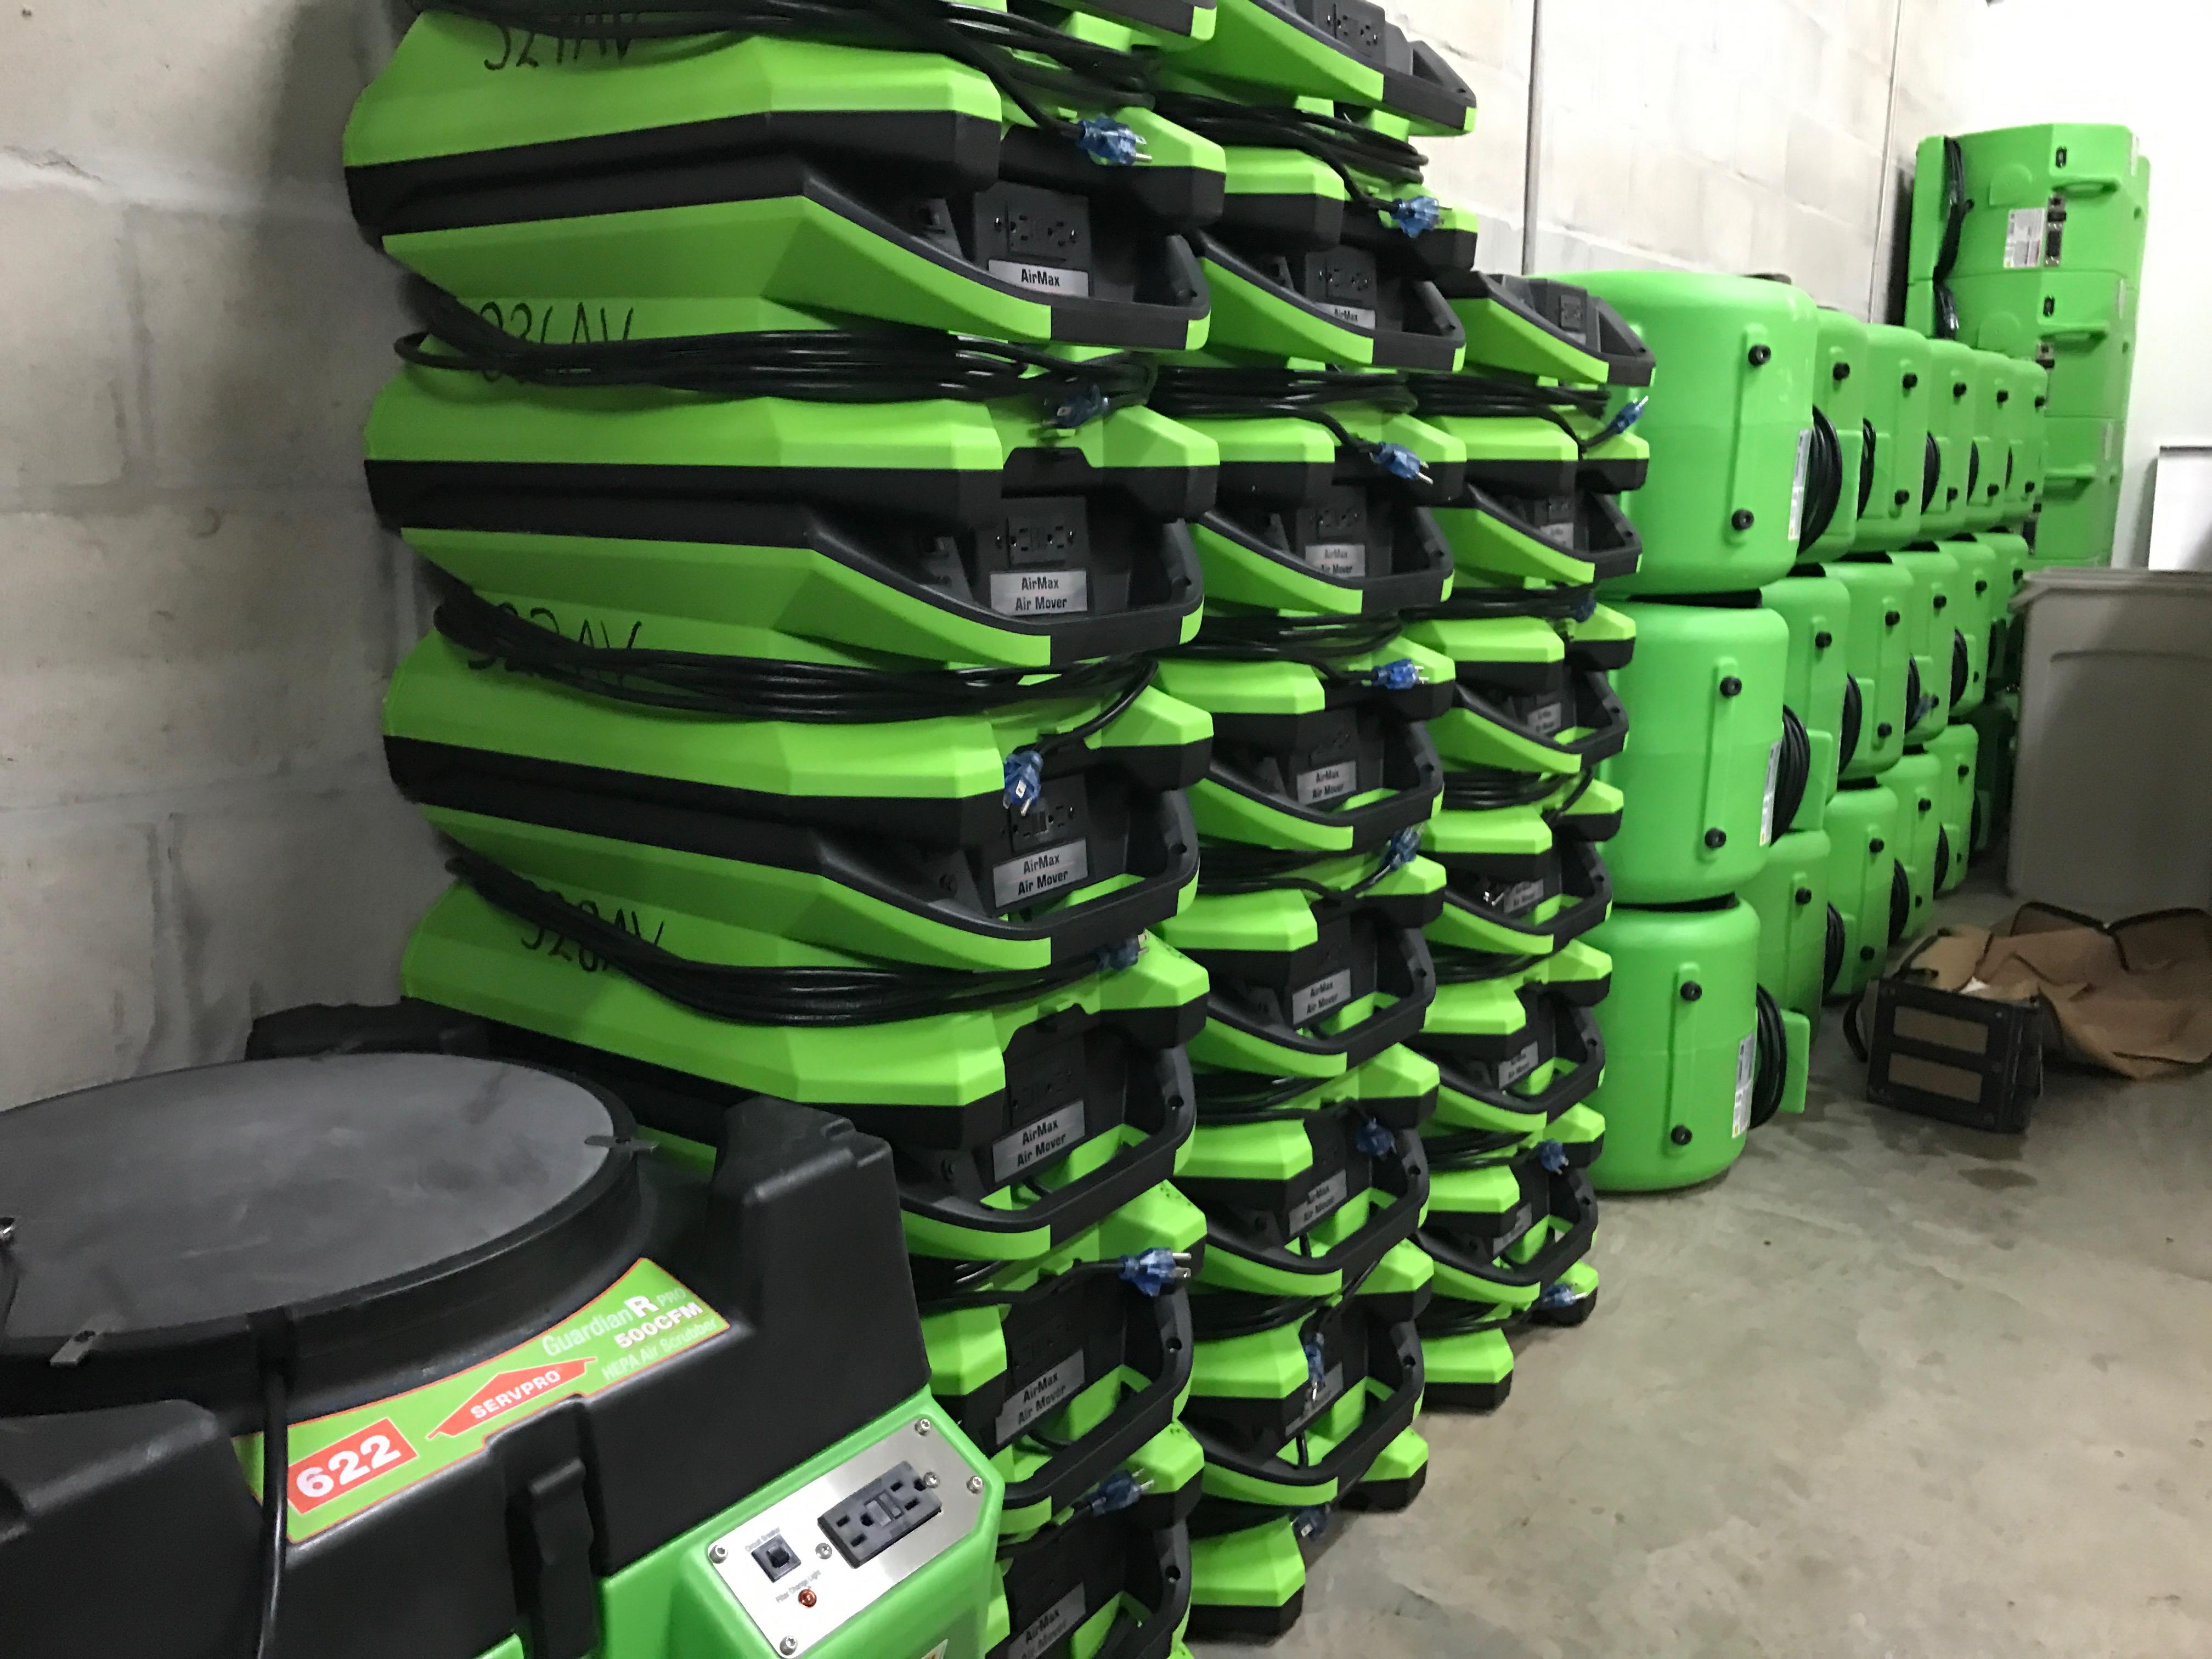 Here at SERVPRO of Oviedo/ Winter Springs East, we have the best equipment for ANY size loss. When disaster strikes, trust SERVPRO.